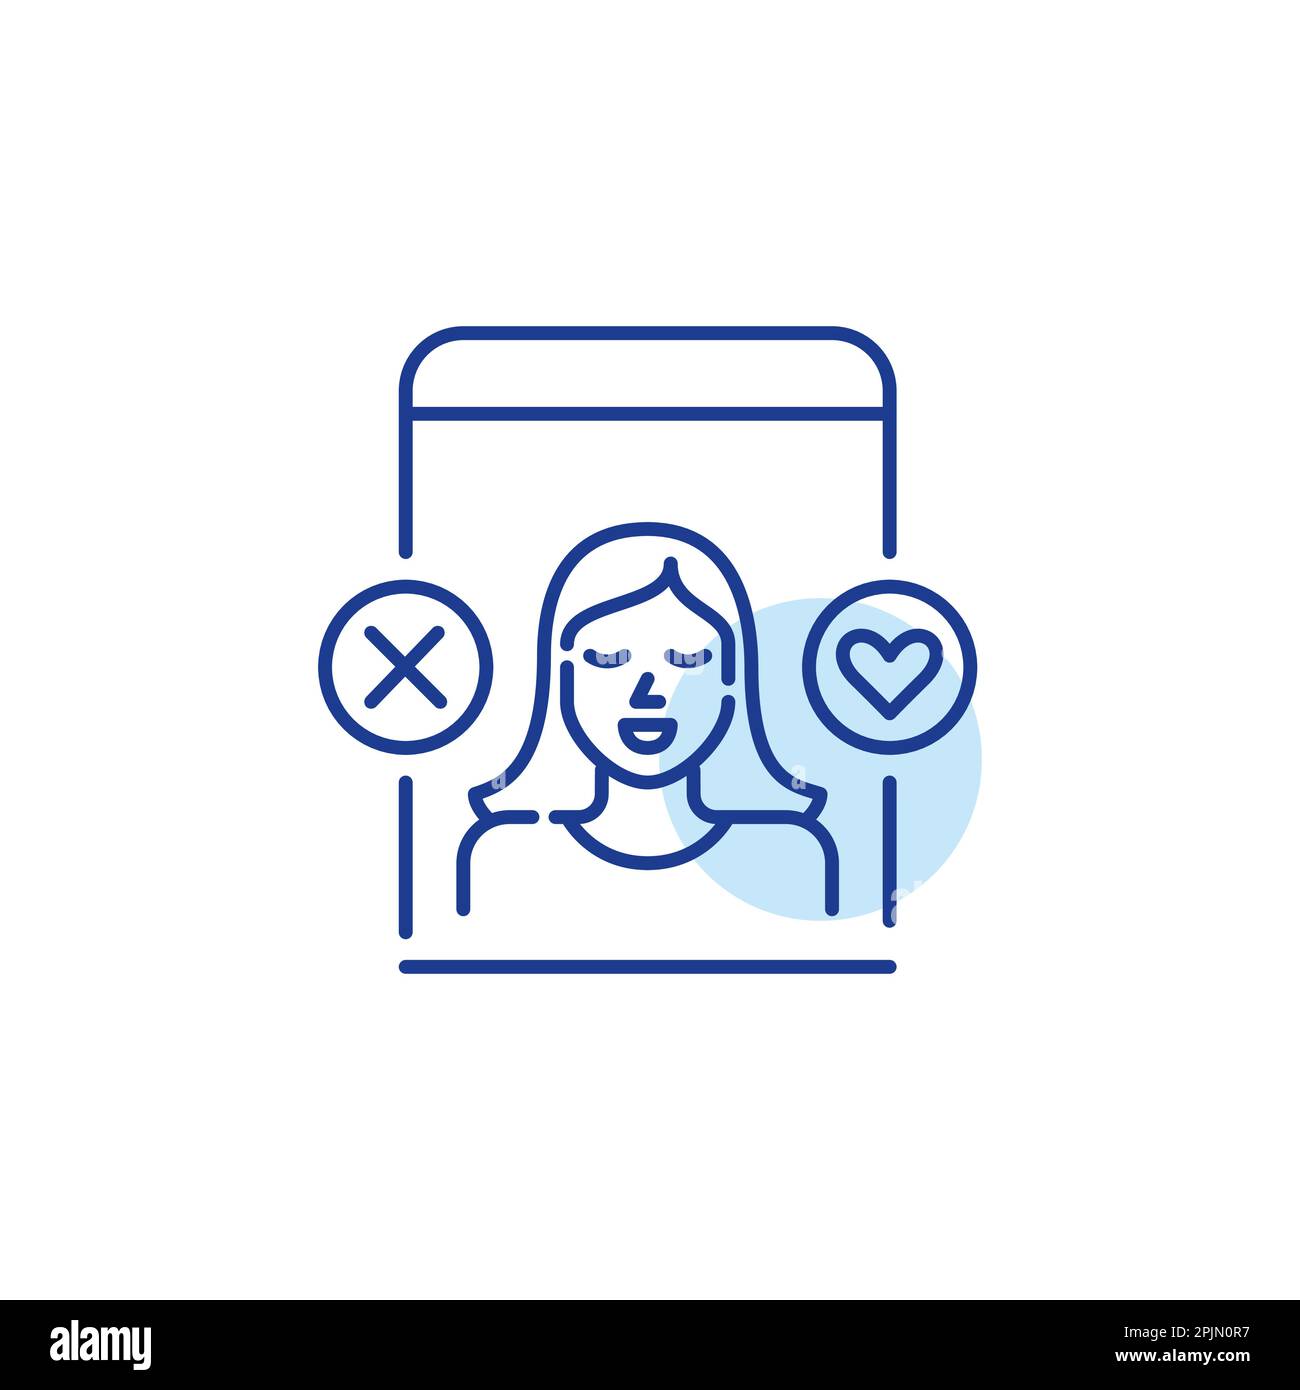 Dating app interface. Pretty girl user. Looking for a romantic partner. Match and pass symbols. Cross and heart icon Stock Vector